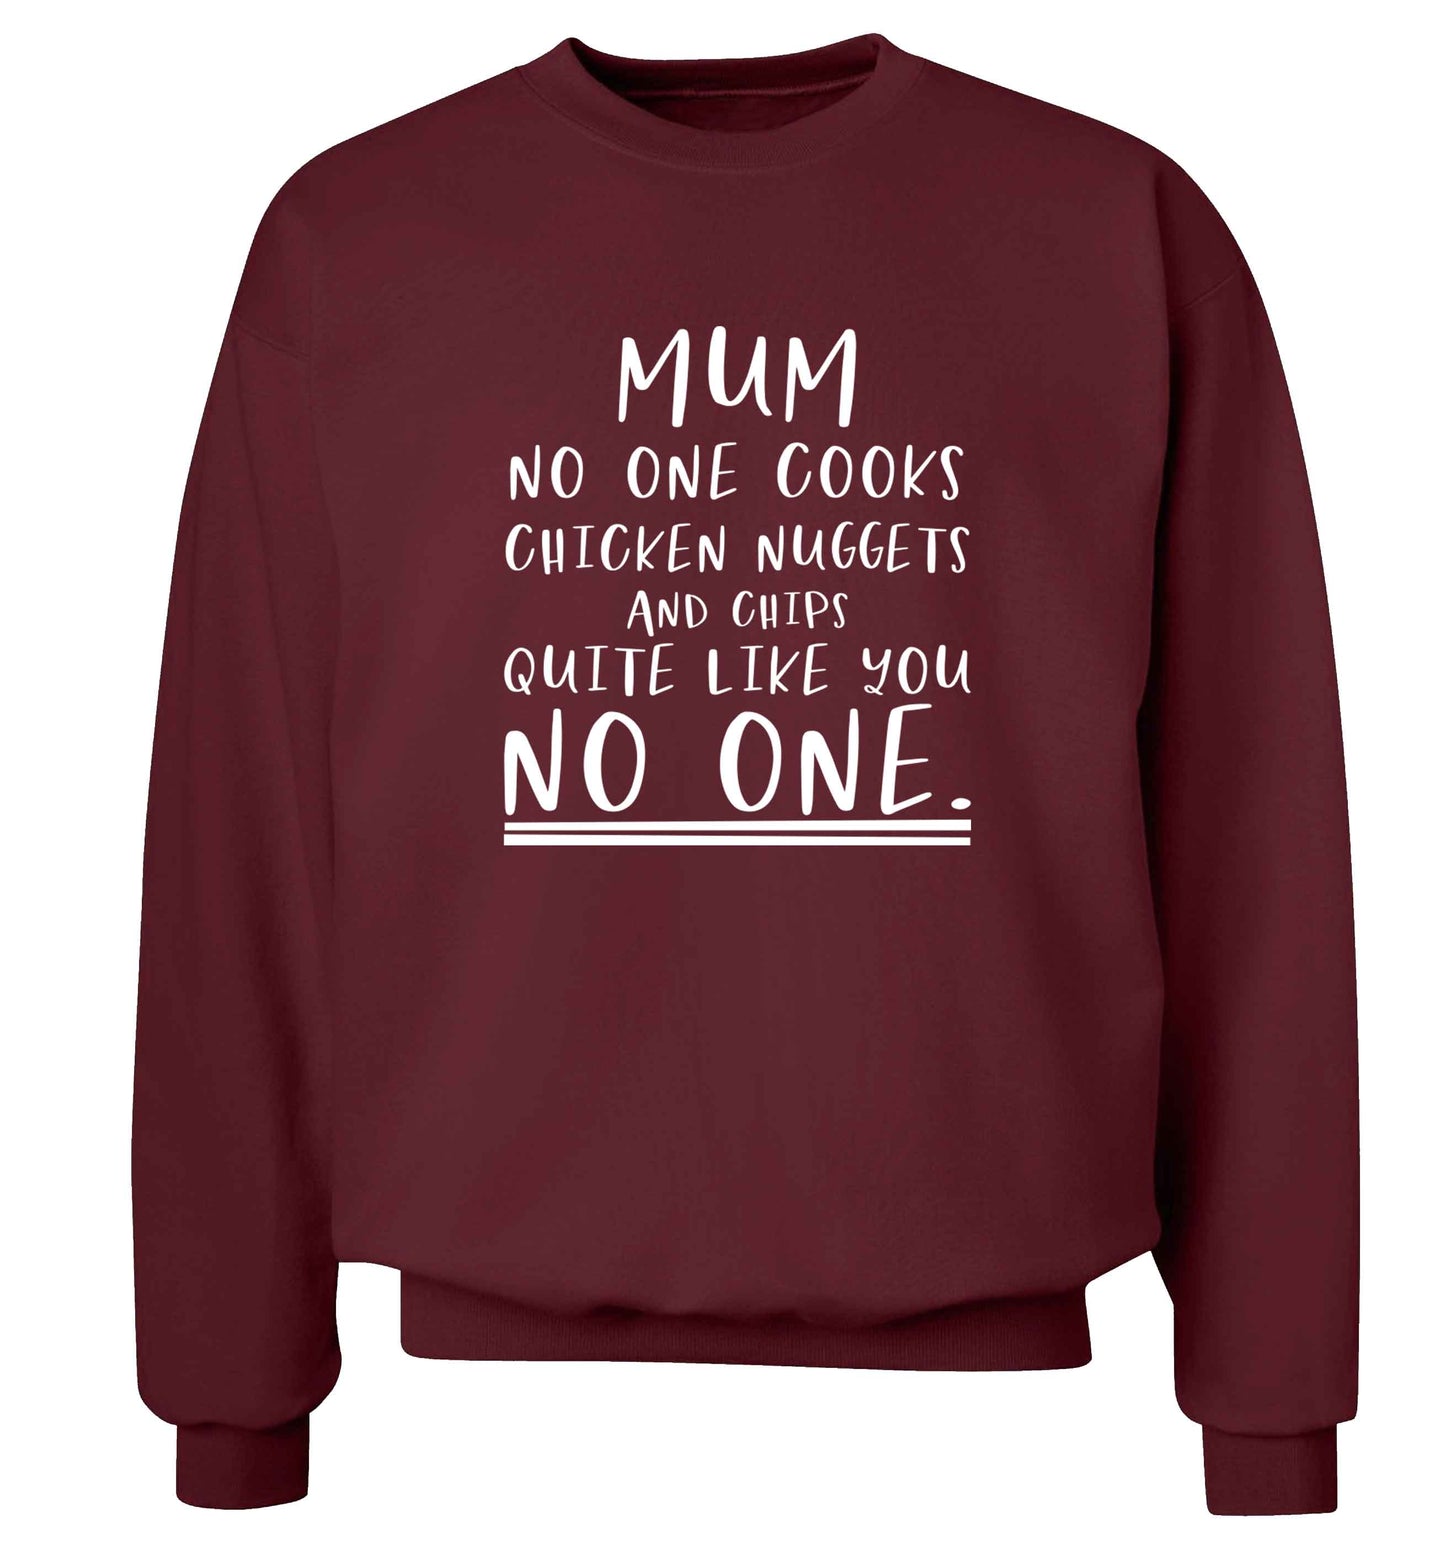 Super funny sassy gift for mother's day or birthday!  Mum no one cooks chicken nuggets and chips like you no one adult's unisex maroon sweater 2XL